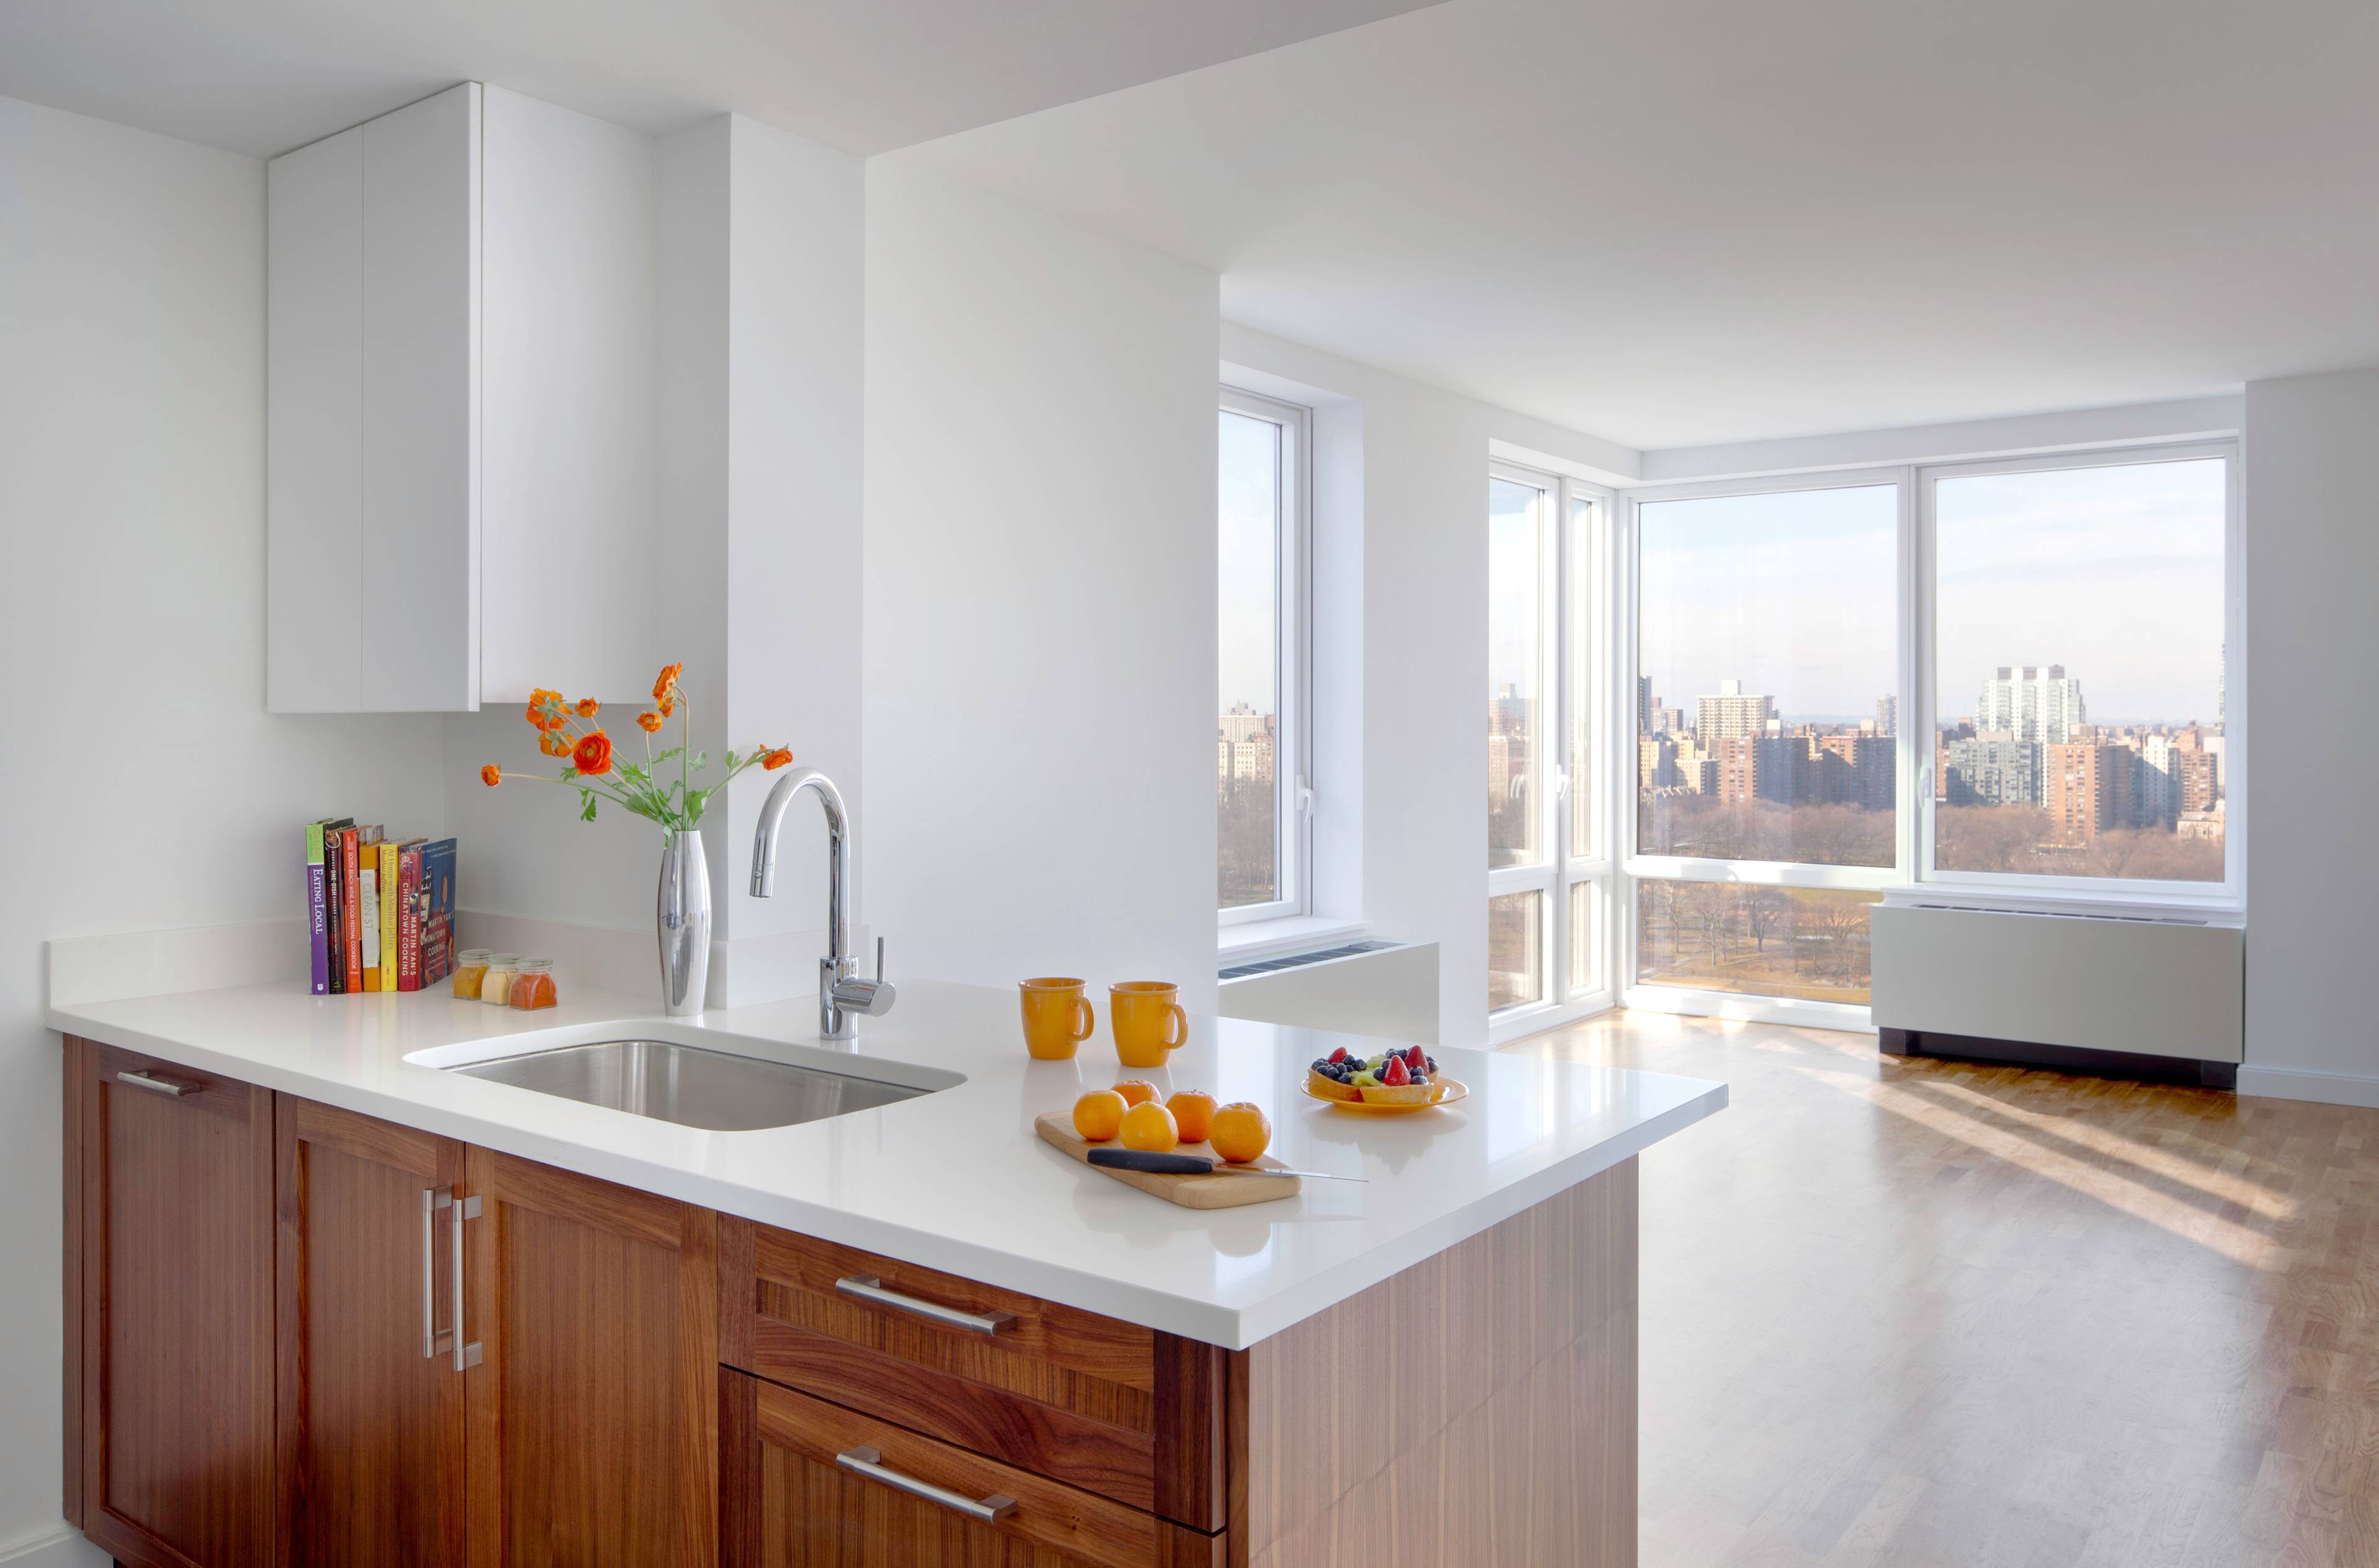 Corner Penthouse 3bed/3 bath Luxury, No fee Apartment in the Upper East Side Steps from Central Park